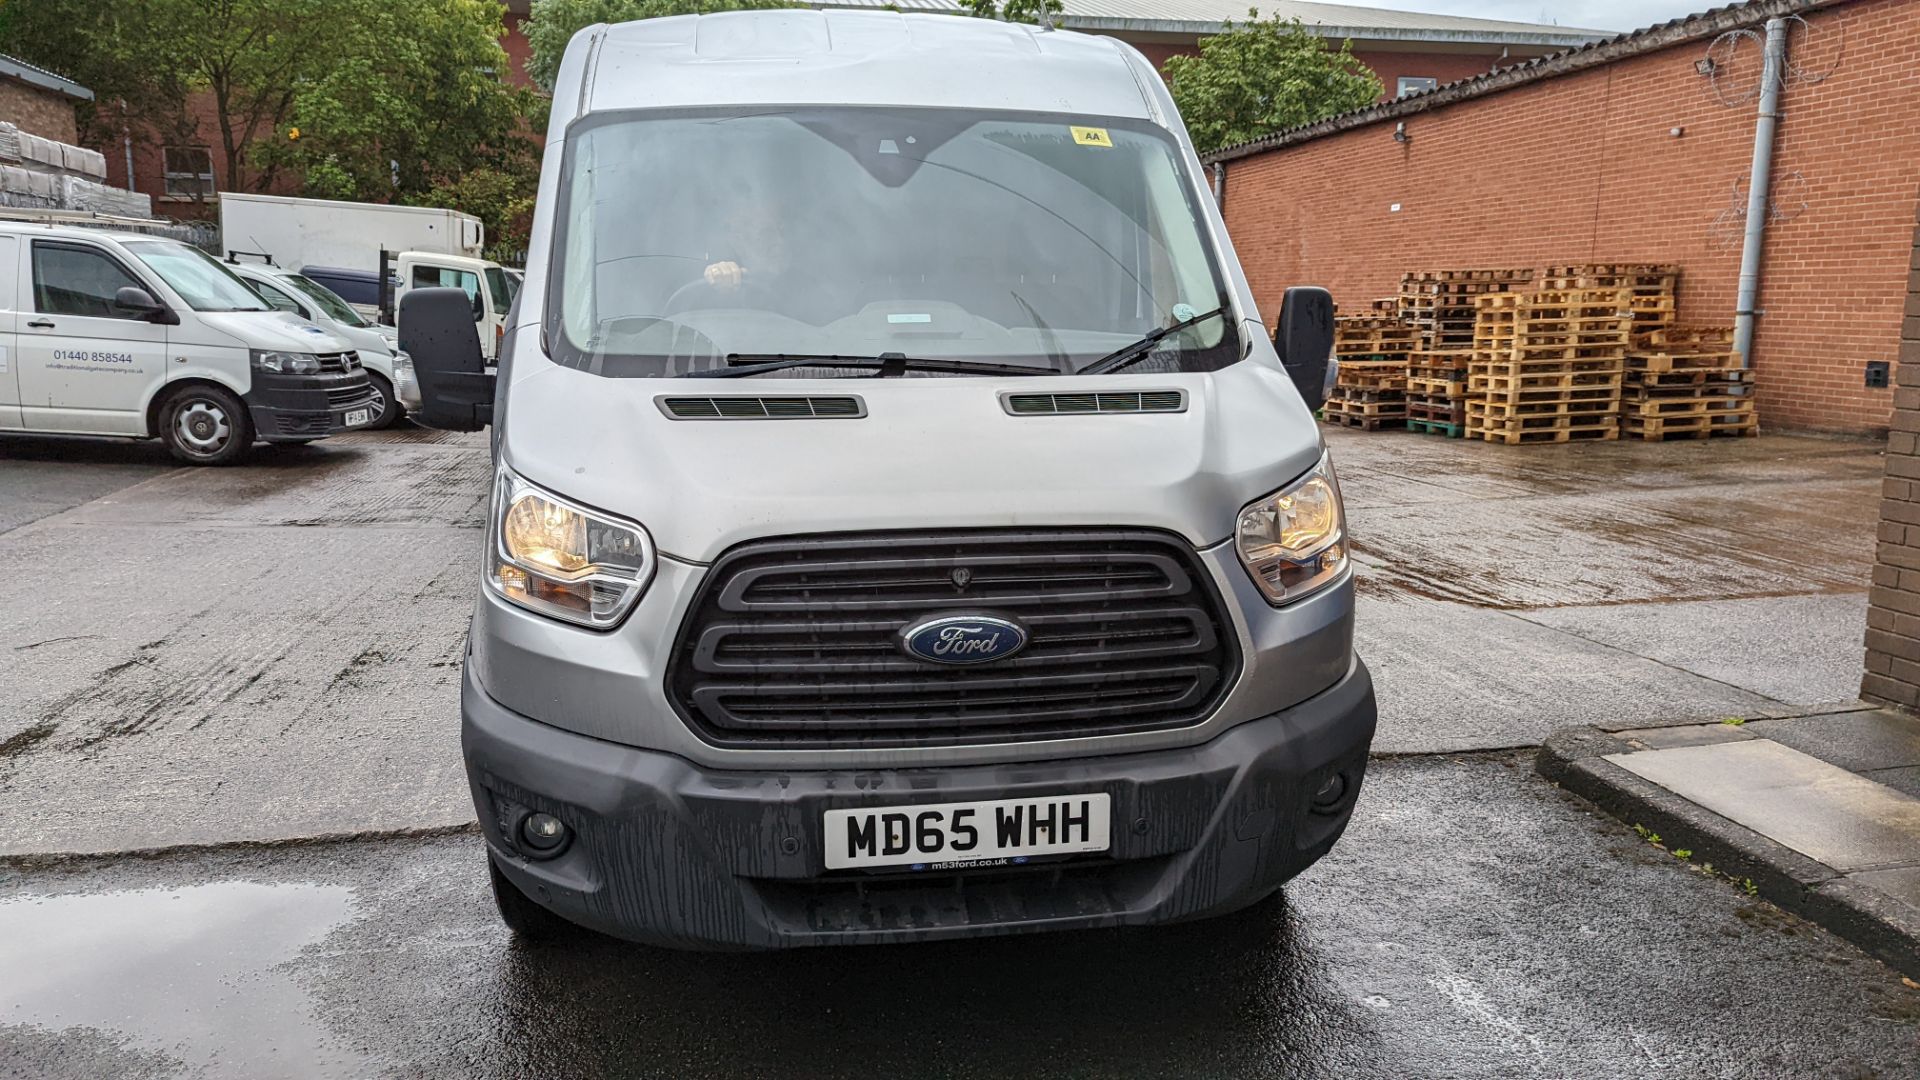 MD65 WHH Ford Transit 350, 6-speed manual gearbox, 2198cc diesel engine, 5981mm x 2550mm. Colour: Si - Image 5 of 51